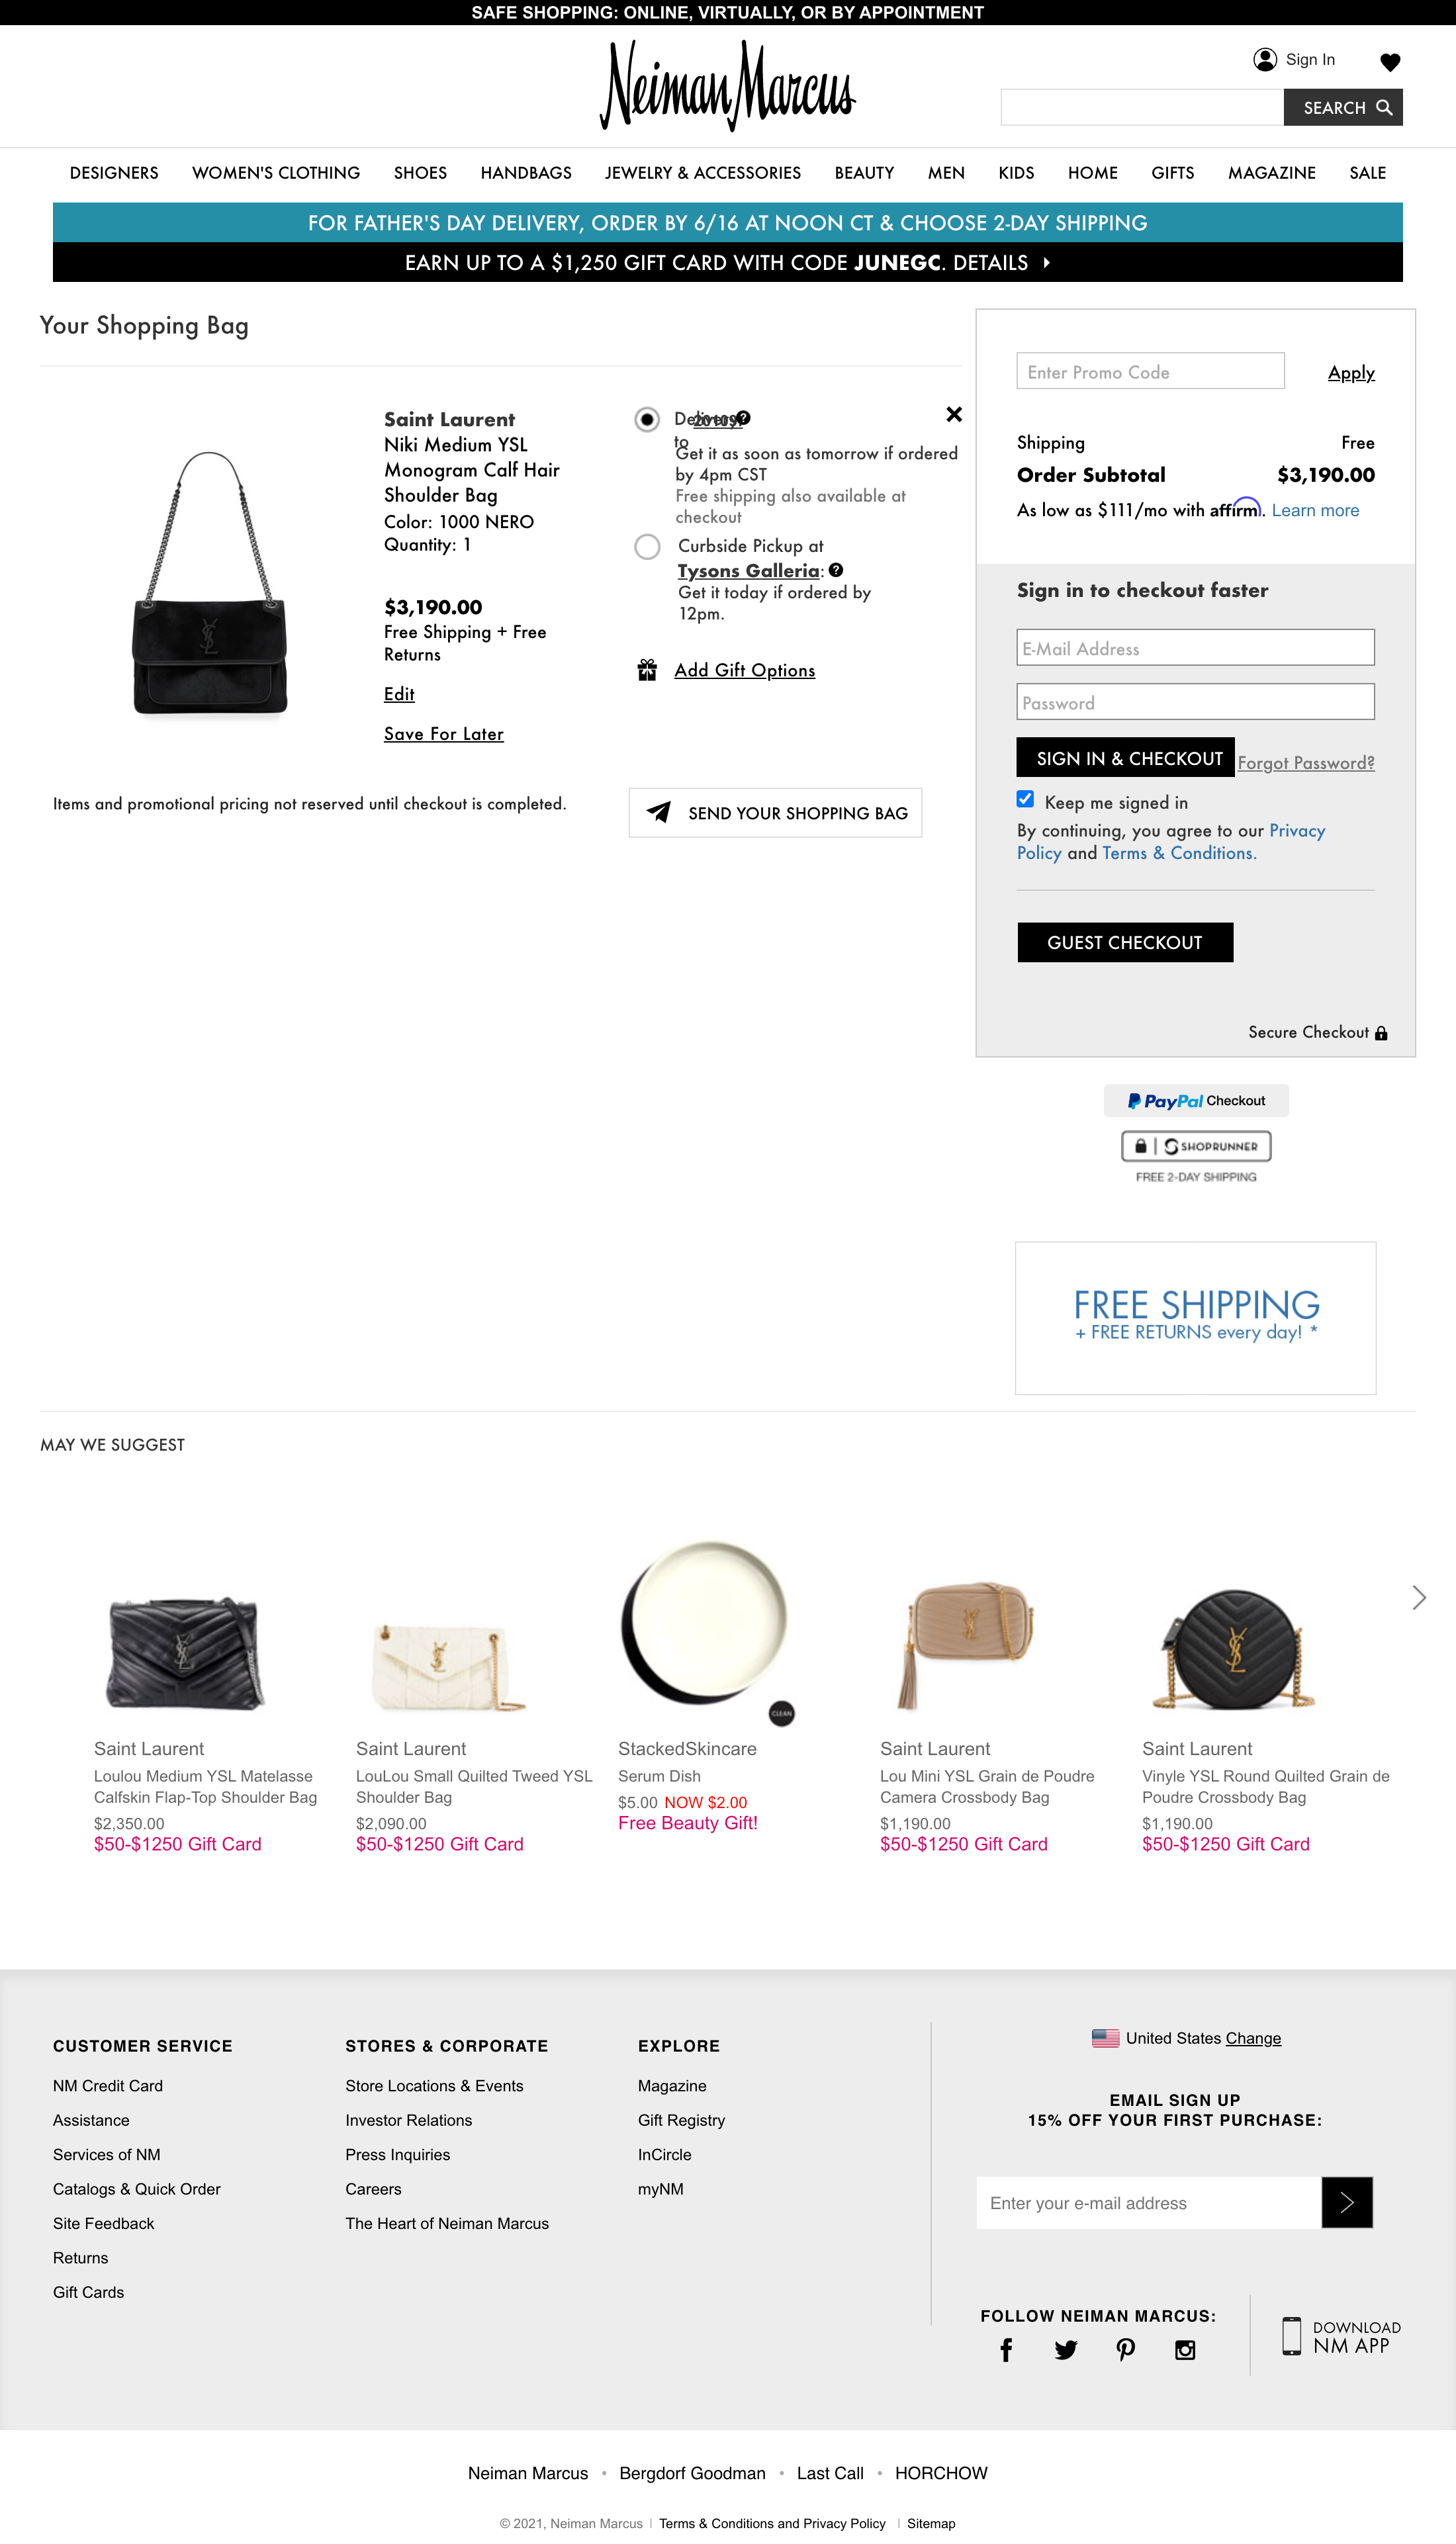 Louis Vuitton's Account Selection – 322 of 686 Account Selection Examples –  Baymard Institute